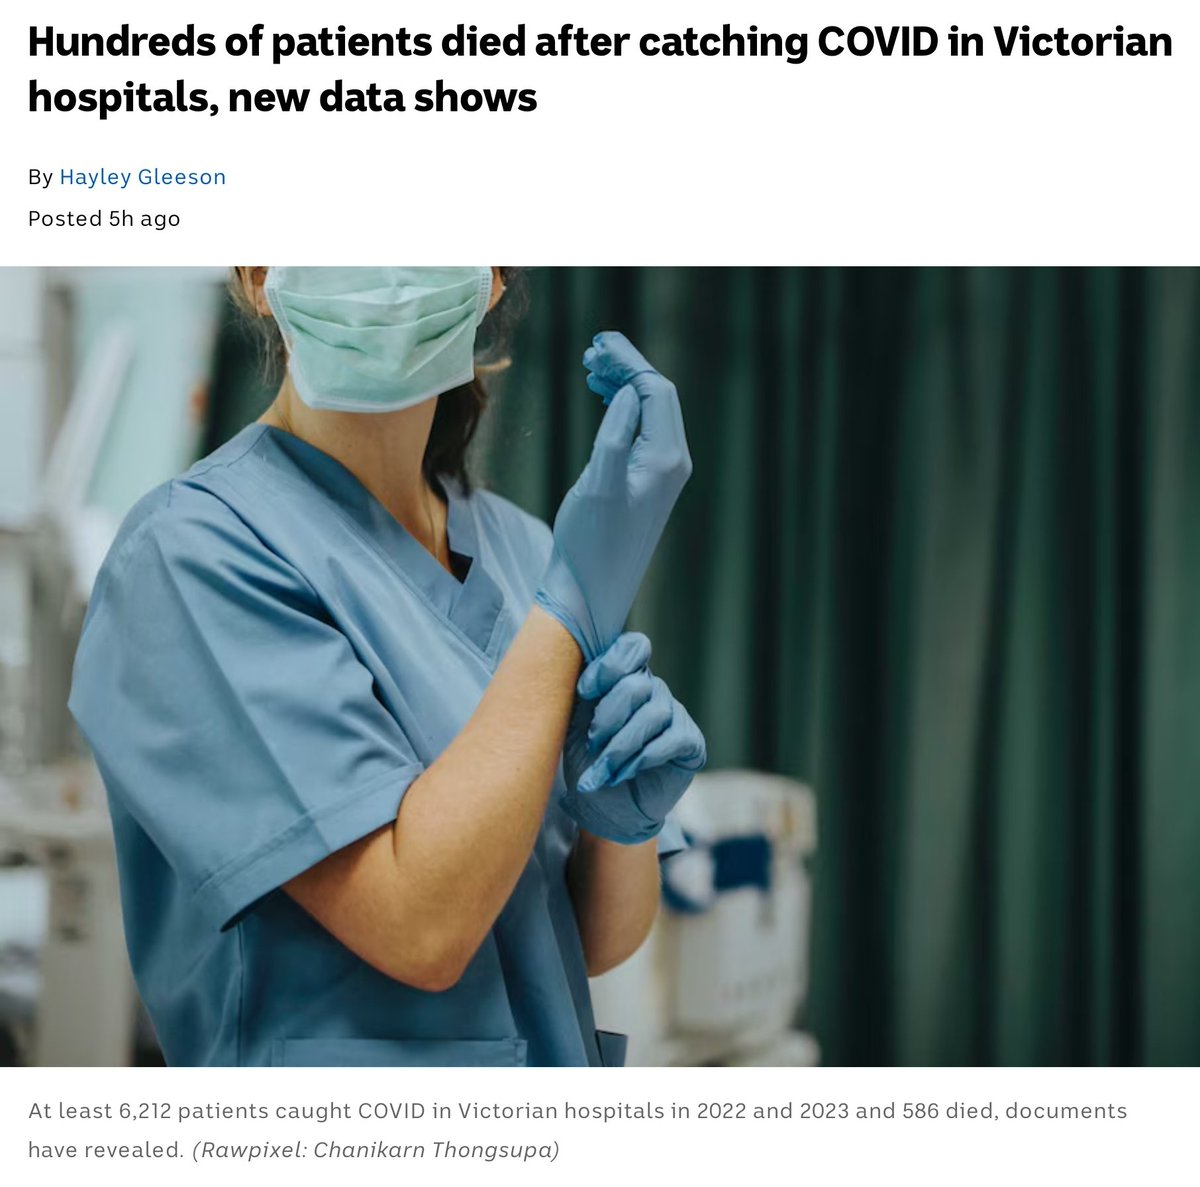 Documents obtained under FOIA reveal 'at least 6,212 patients caught COVID in hospital in 24 months...Of those, 586 died...with men dying at a higher rate than women [11% vs 8%].' Nearly 1 in 10 patients who caught COVID in the hospital died. How can anyone find this acceptable?